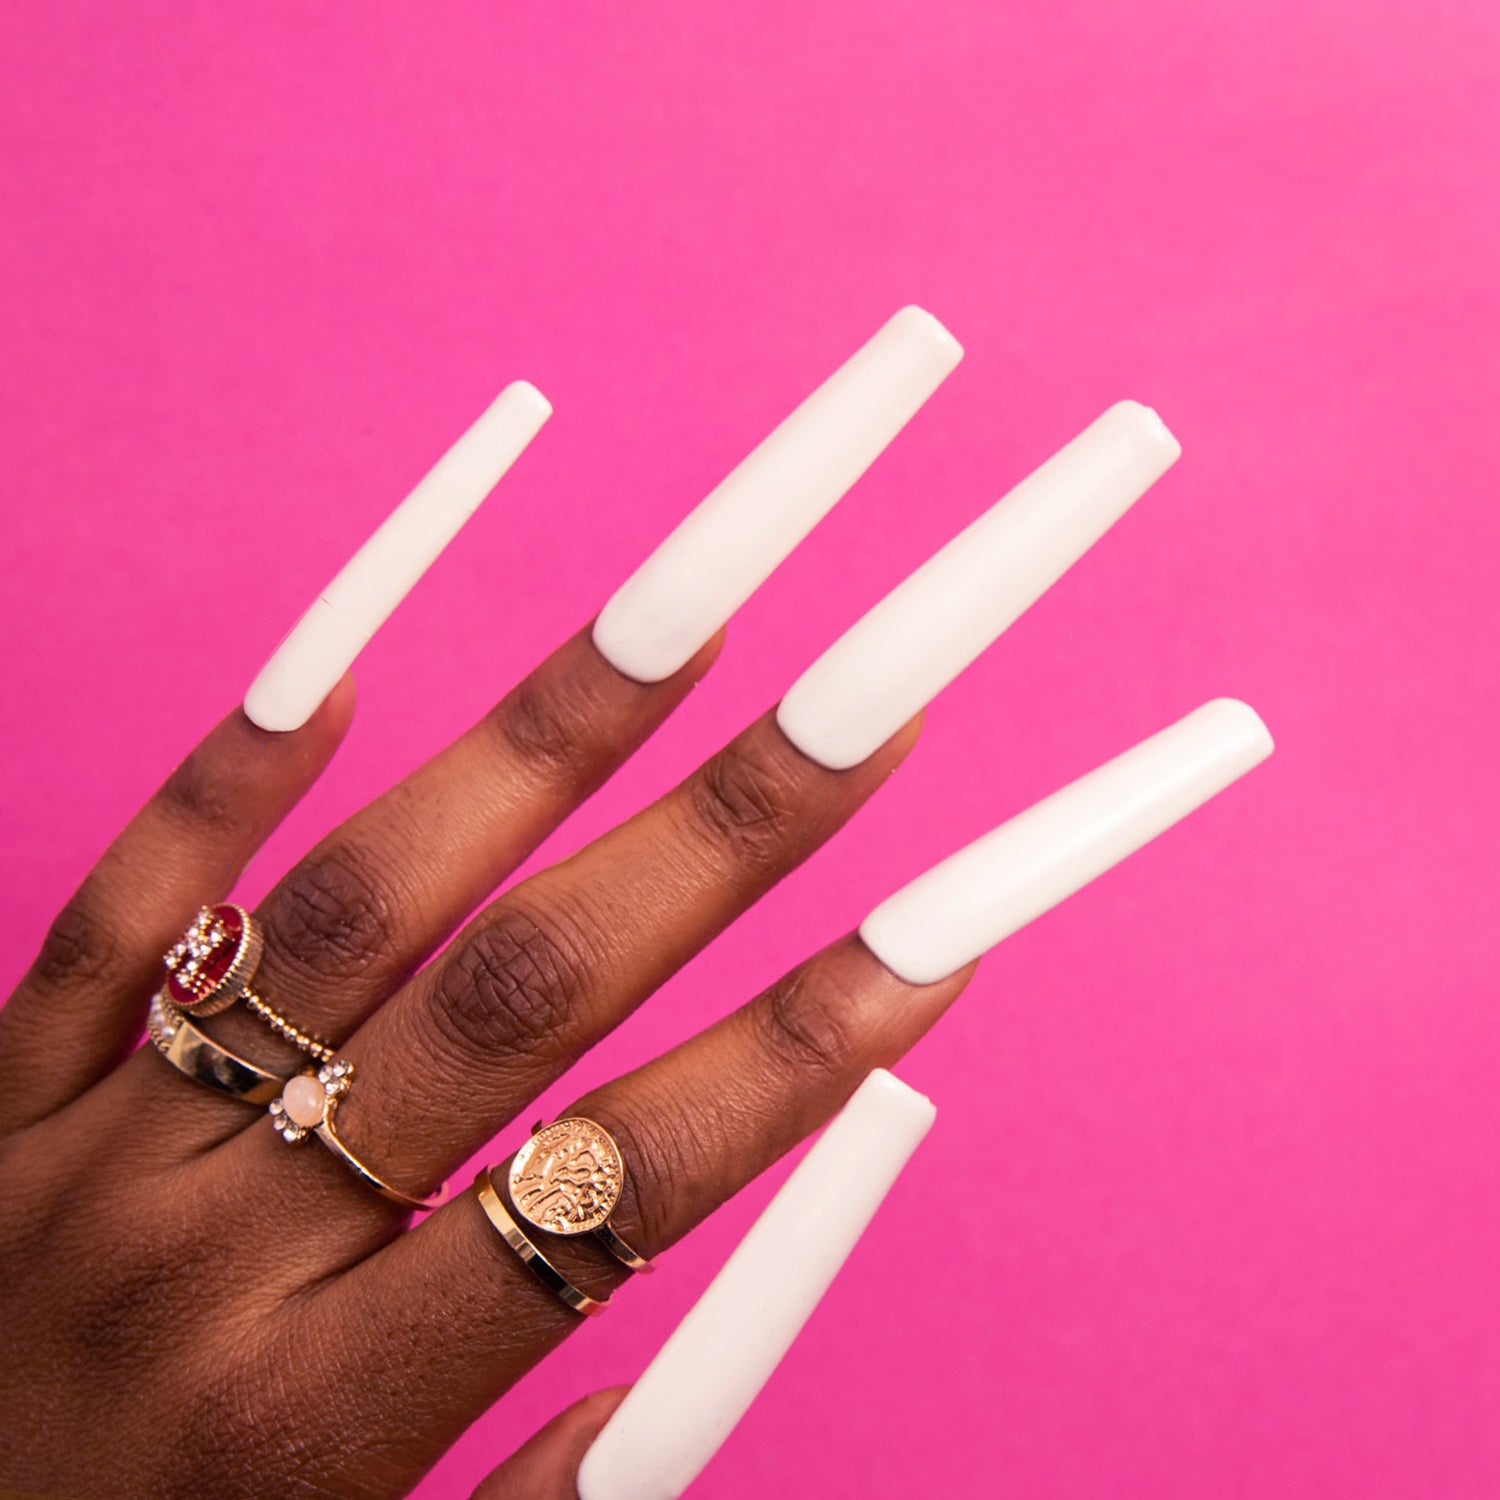 Hand with long, square-shaped, white press-on acrylic nails against a pink background, adorned with multiple rings including a red gemstone and gold rings. High-quality press-on nails by Lovful.com